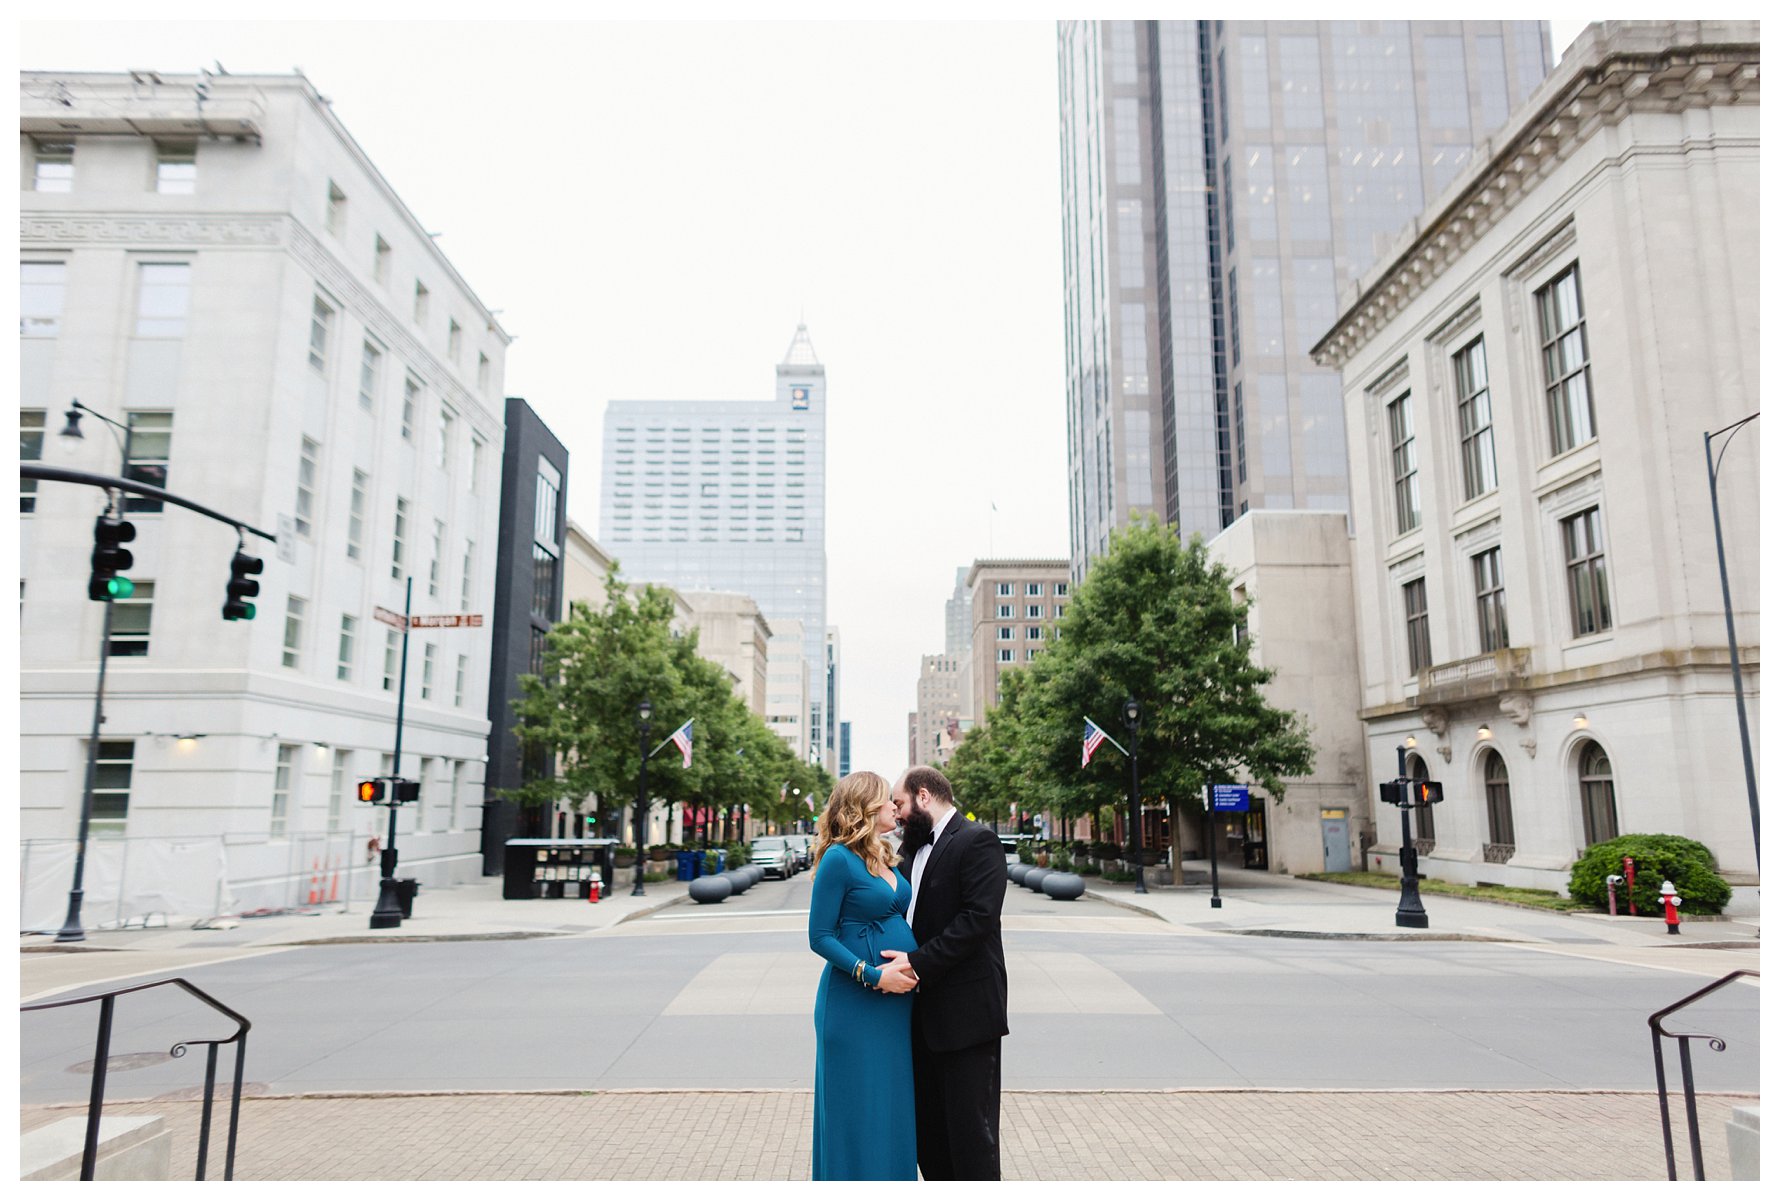 Fayetteville Street, Raleigh, NC Maternity Photography